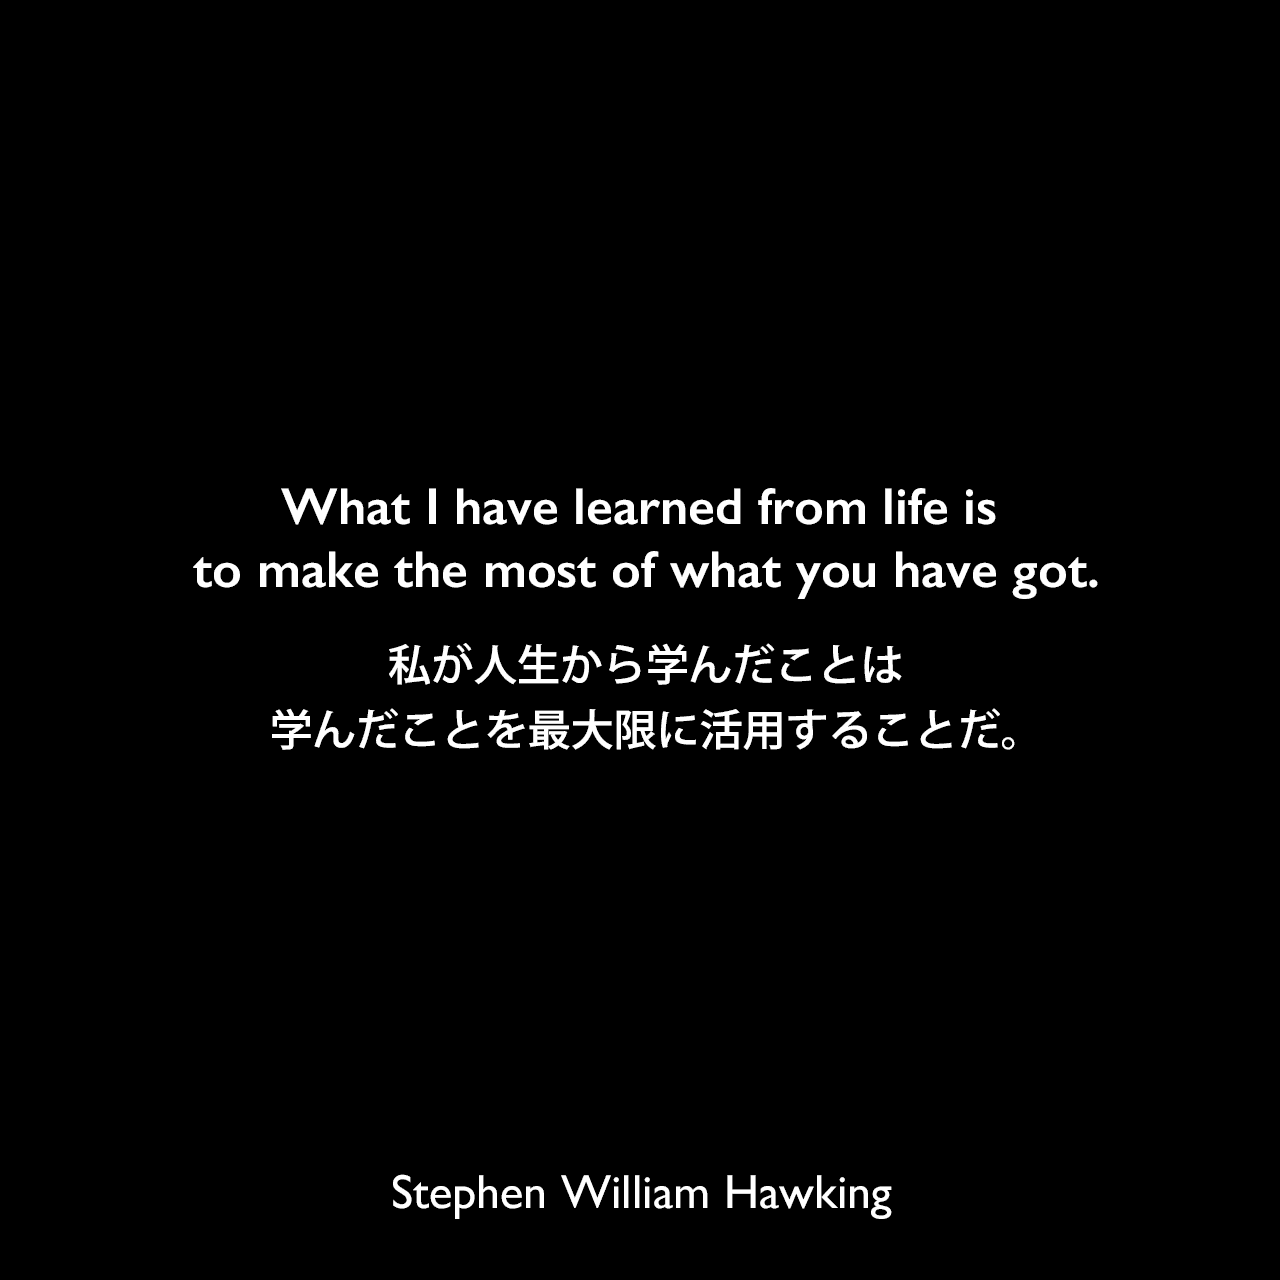 What I have learned from life is to make the most of what you have got.私が人生から学んだことは、学んだことを最大限に活用することだ。Stephen William Hawking